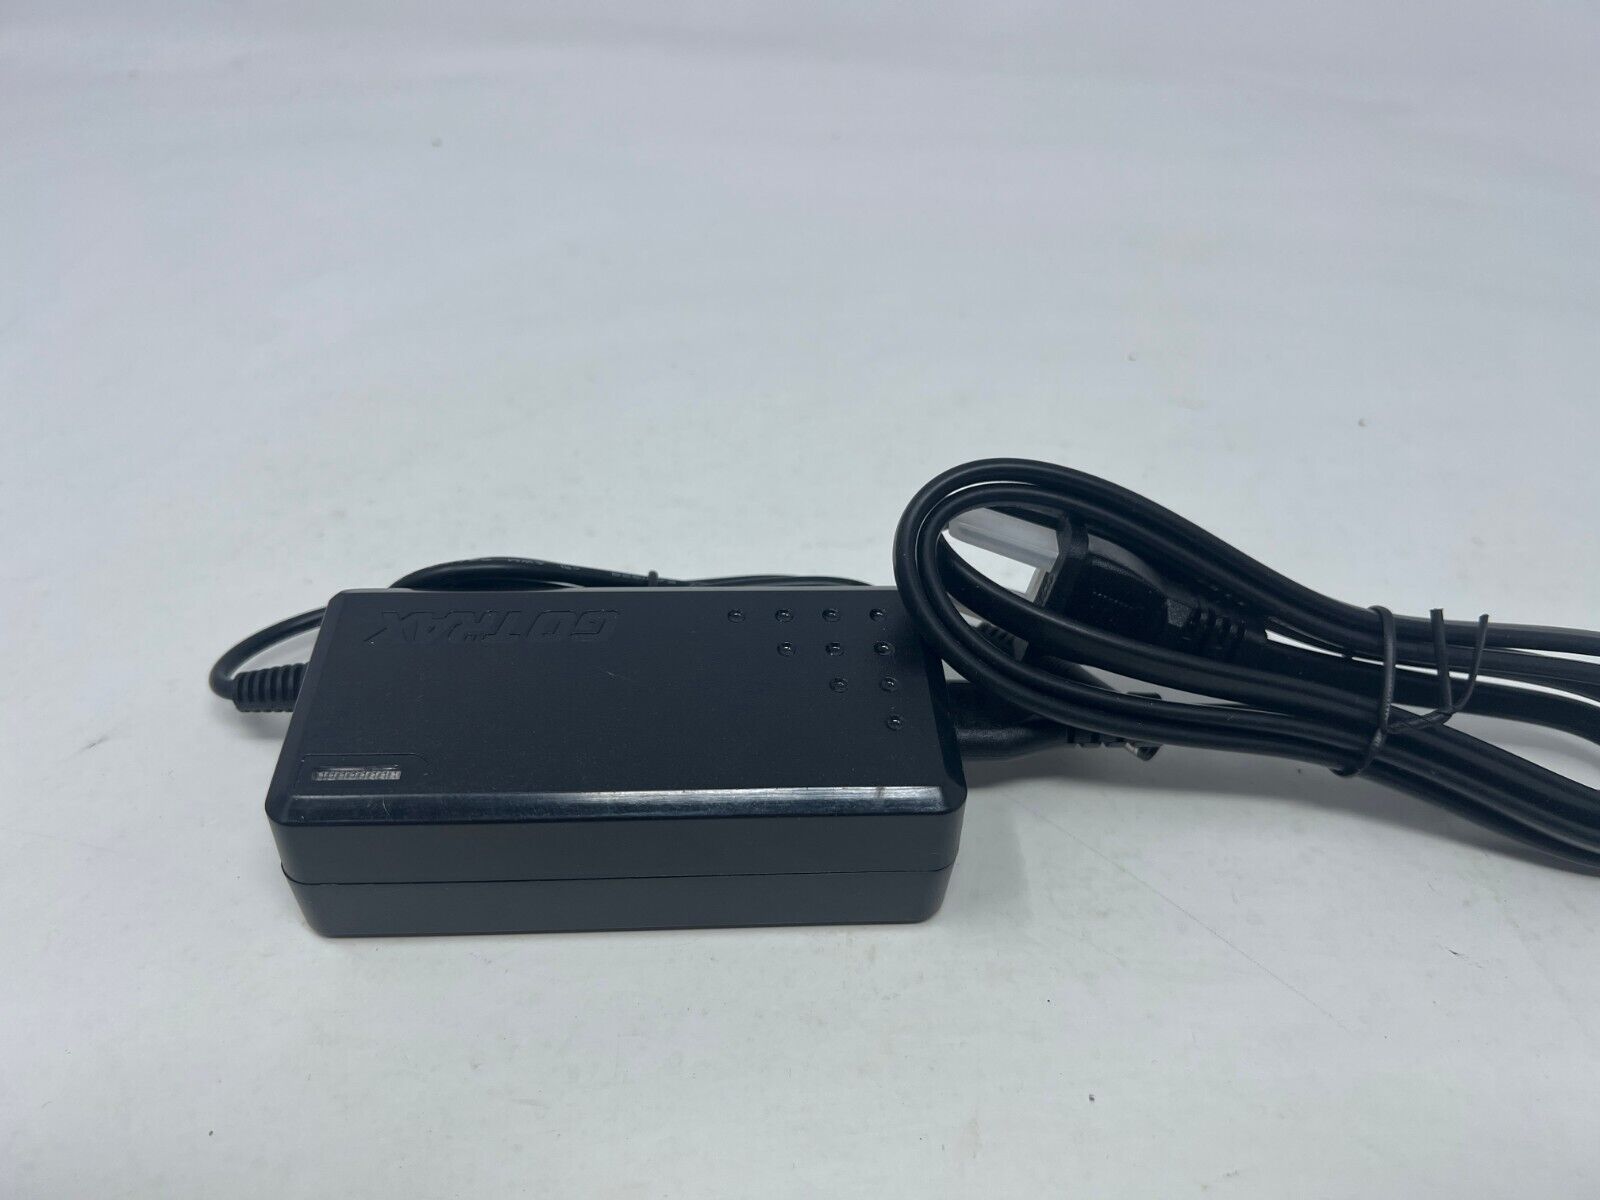 42V AC ADAPTER CHARGER FOR GOTRAX FY0634201500 APEX & GXL V2 ELECTRIC SCOOTER